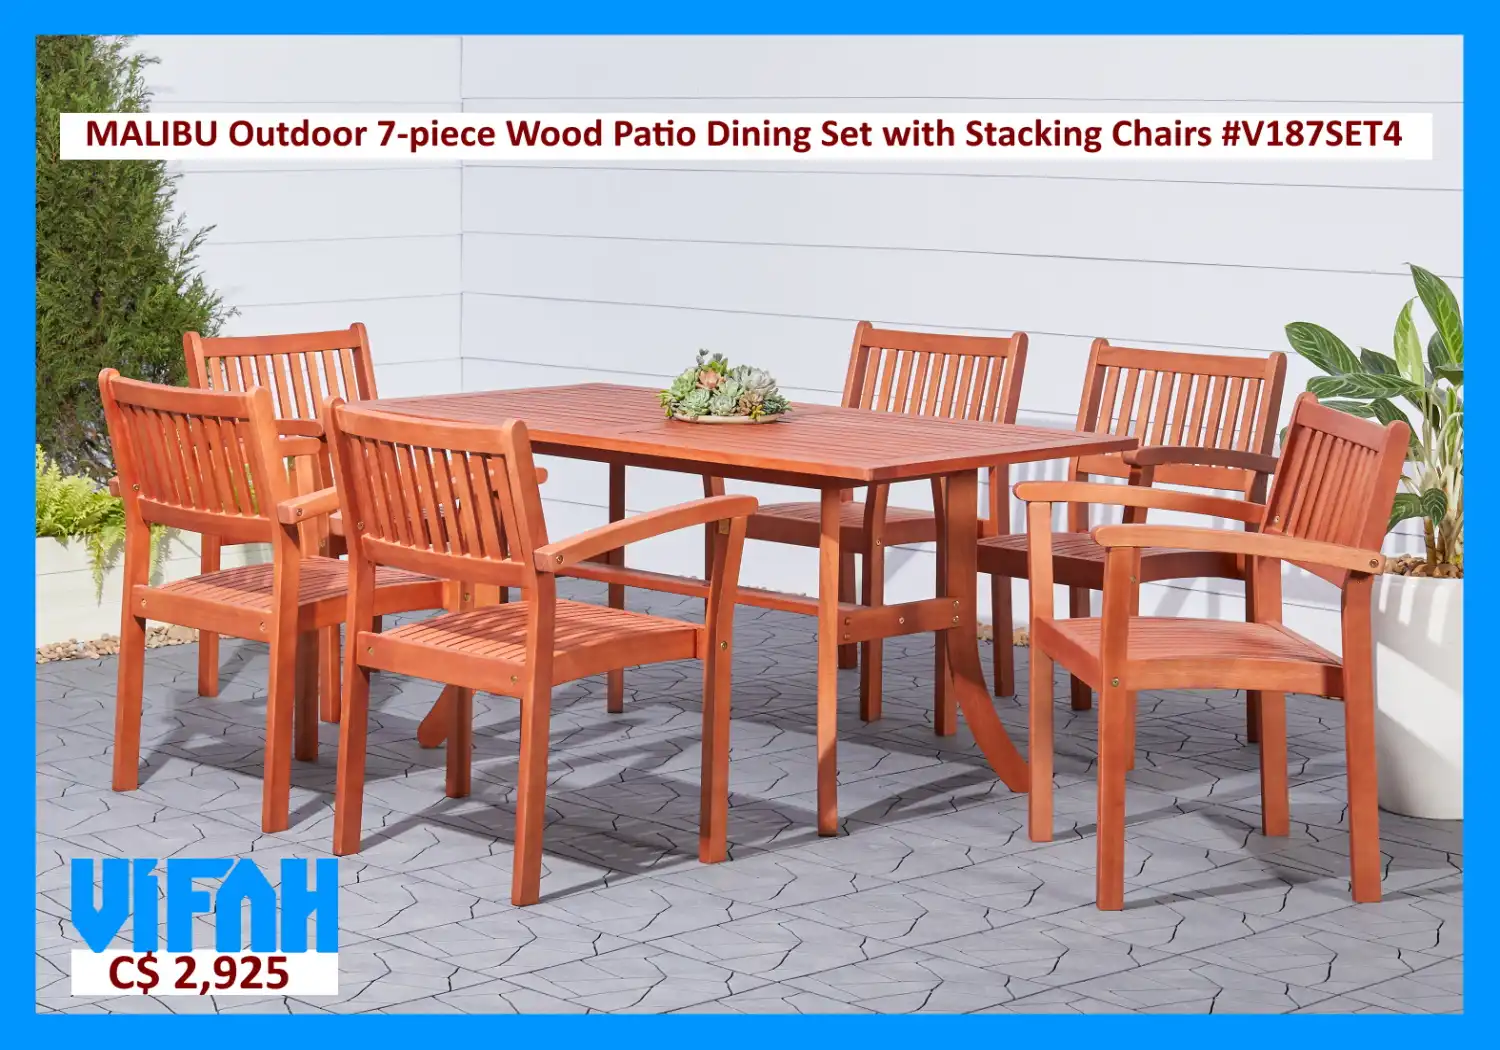 MALIBU Outdoor #V187SET4 7-piece Wood Patio Dining Set with Stacking Chairs